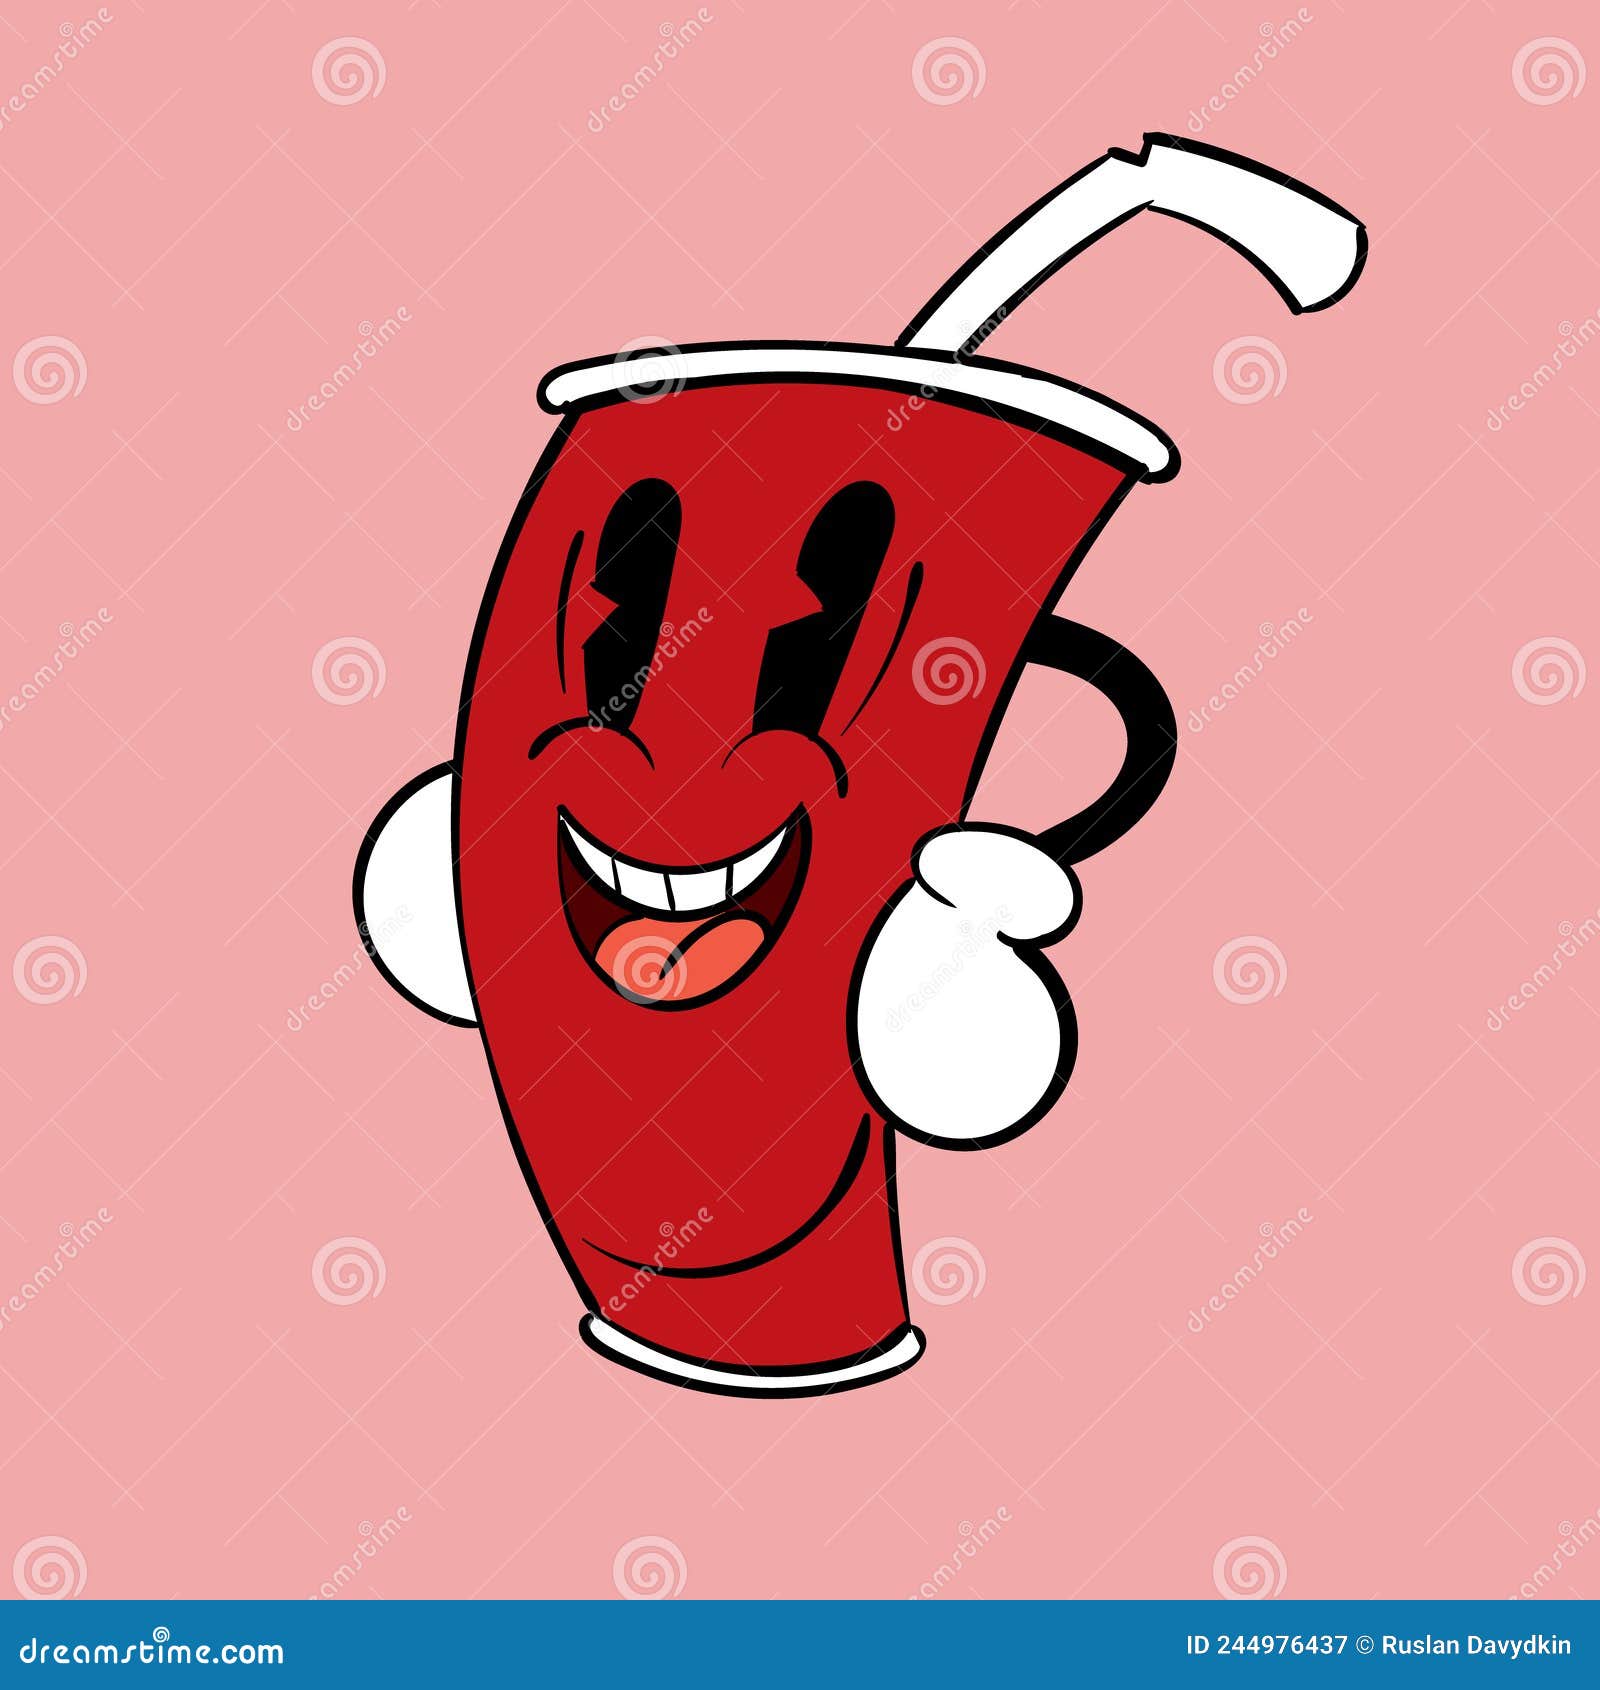 A Paper Cup of Soda. Vintage Toons: Funny Character, Vector Illustration  Trendy Classic Retro Cartoon Style Stock Vector - Illustration of soda,  animal: 244976437